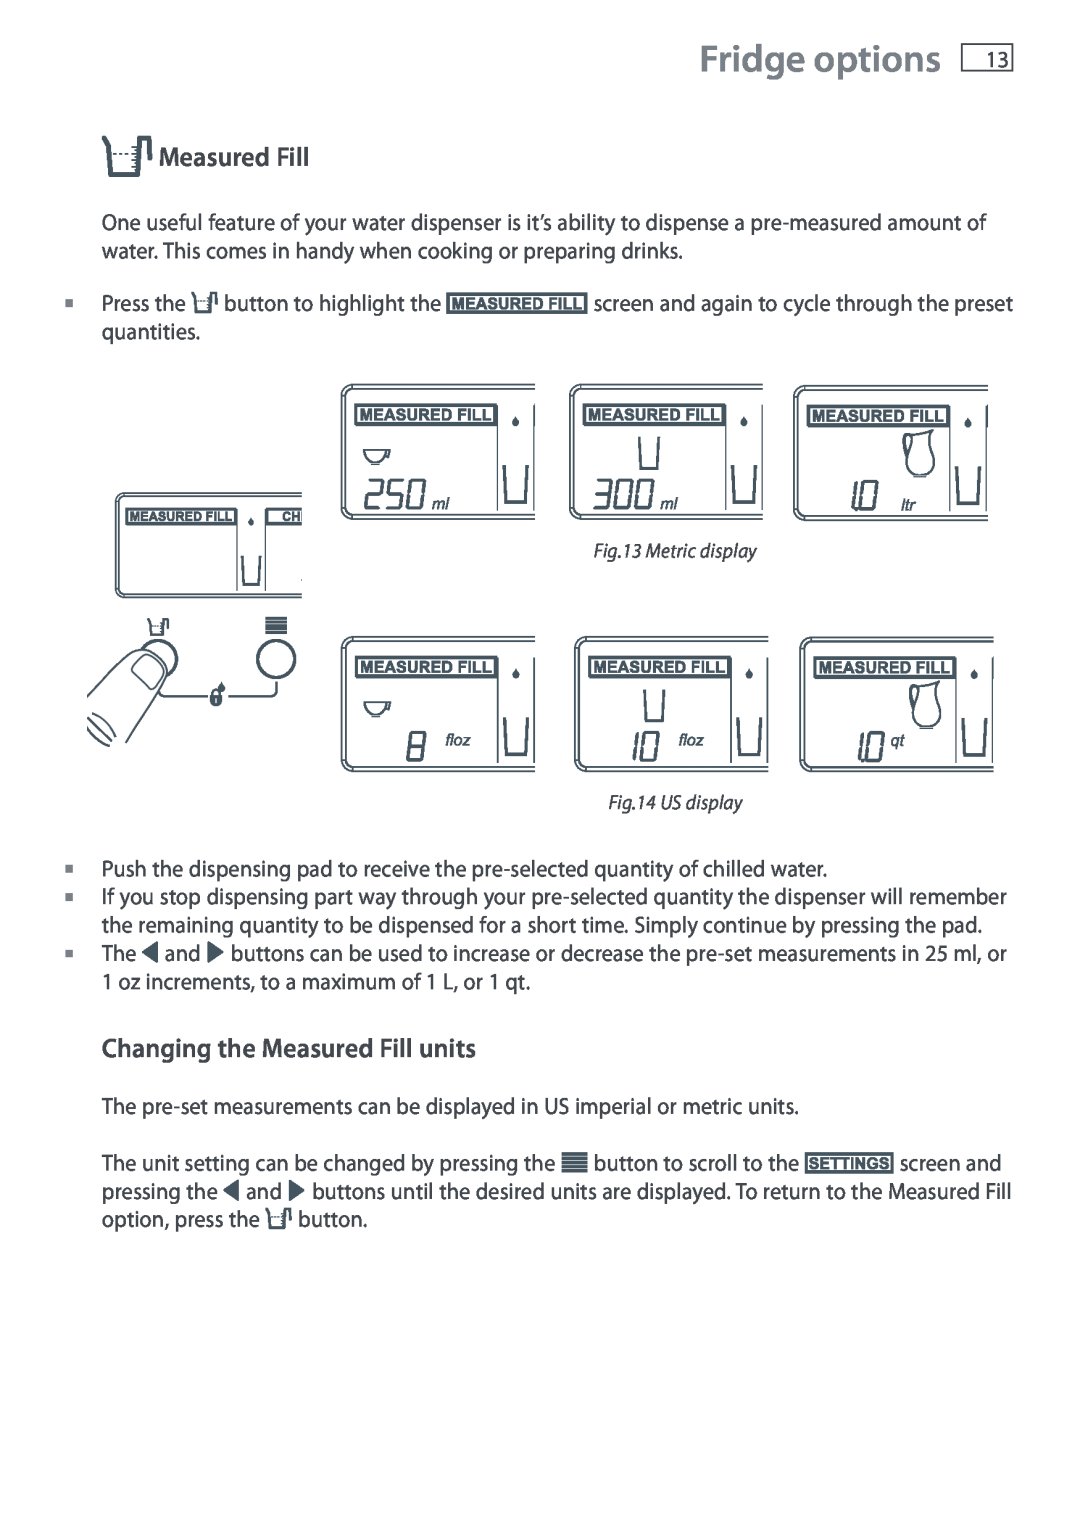 Fisher & Paykel E402B, E442B installation instructions Fridge options, Changing the Measured Fill units 